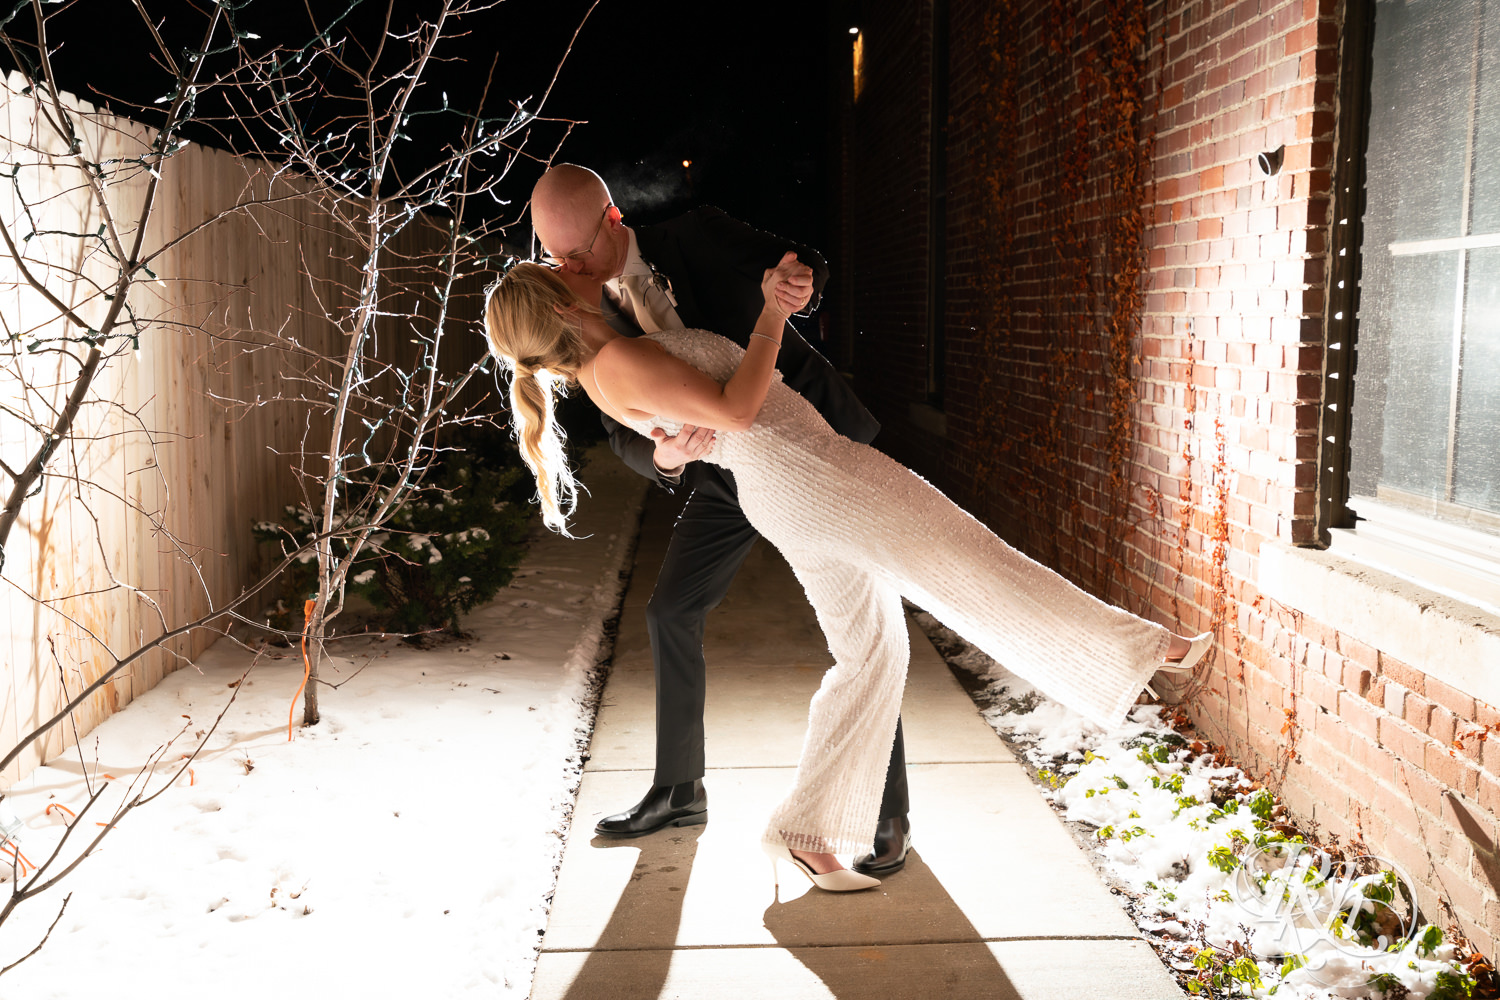 Bride and groom kiss during night photography at Gatherings at Station 10 in Saint Paul, Minnesota.